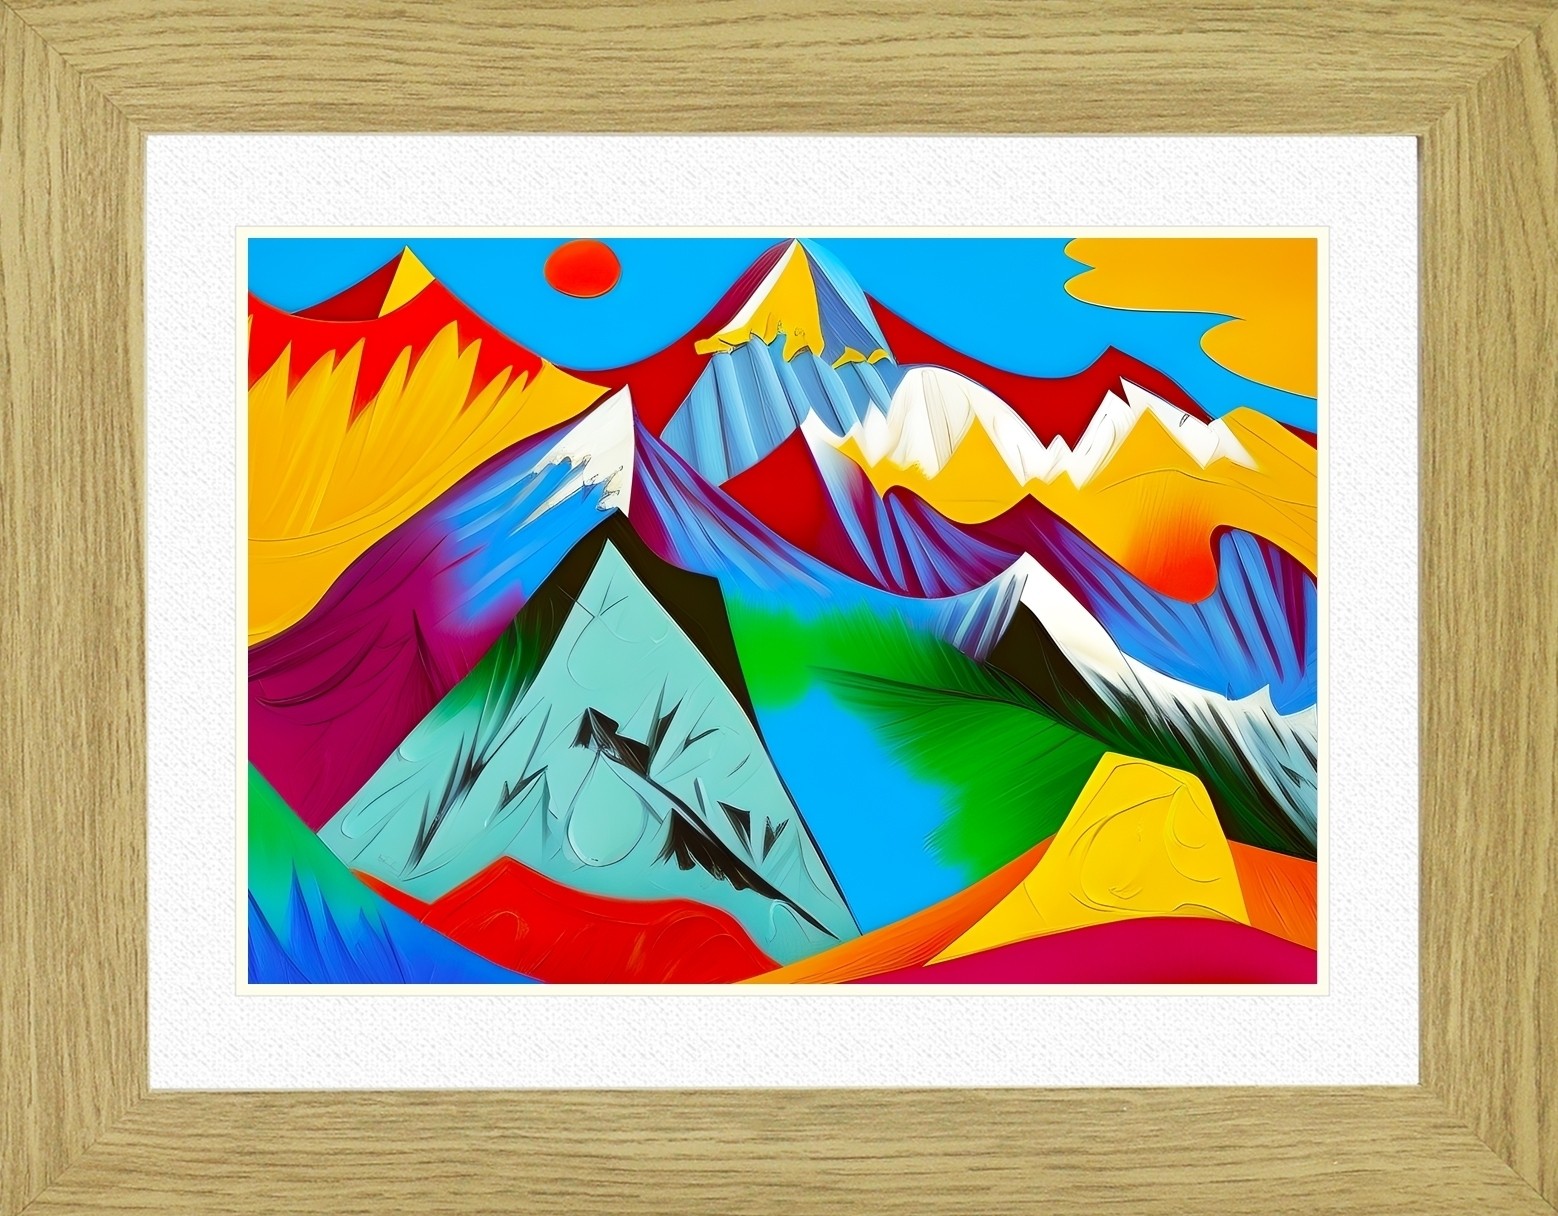 Mountain Scenery Animal Picture Framed Colourful Abstract Art (30cm x 25cm Light Oak Frame)